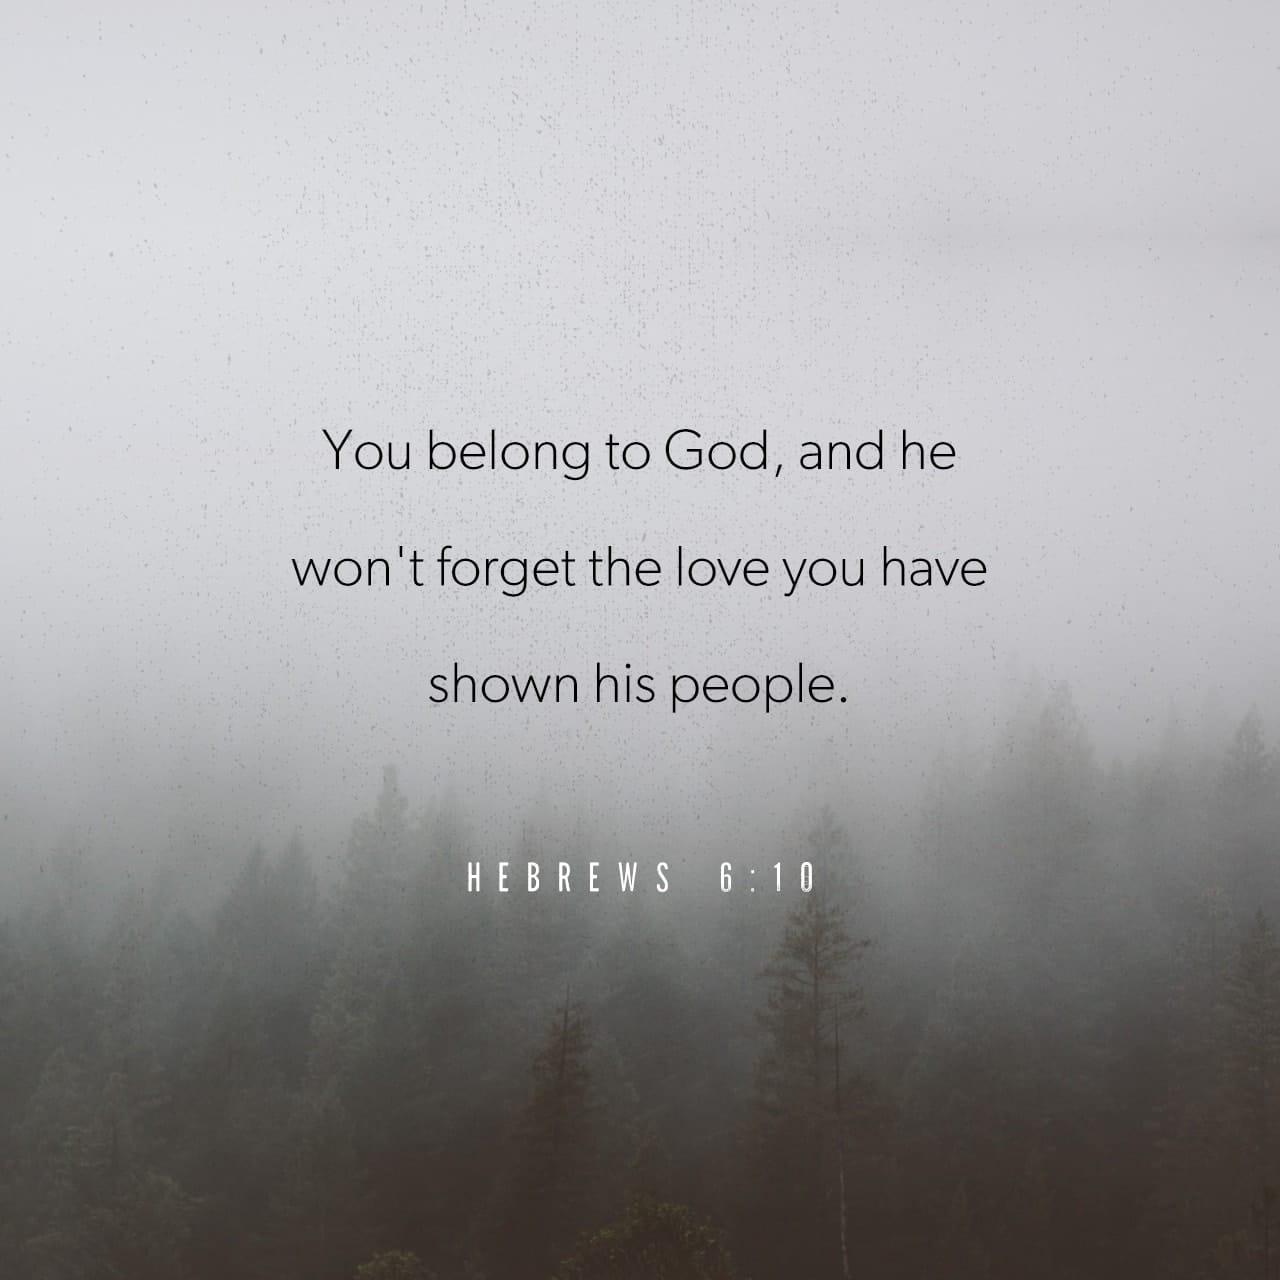 Bible Verse of the Day - day 157 - image 1761 (Hebrews 6:1-20)